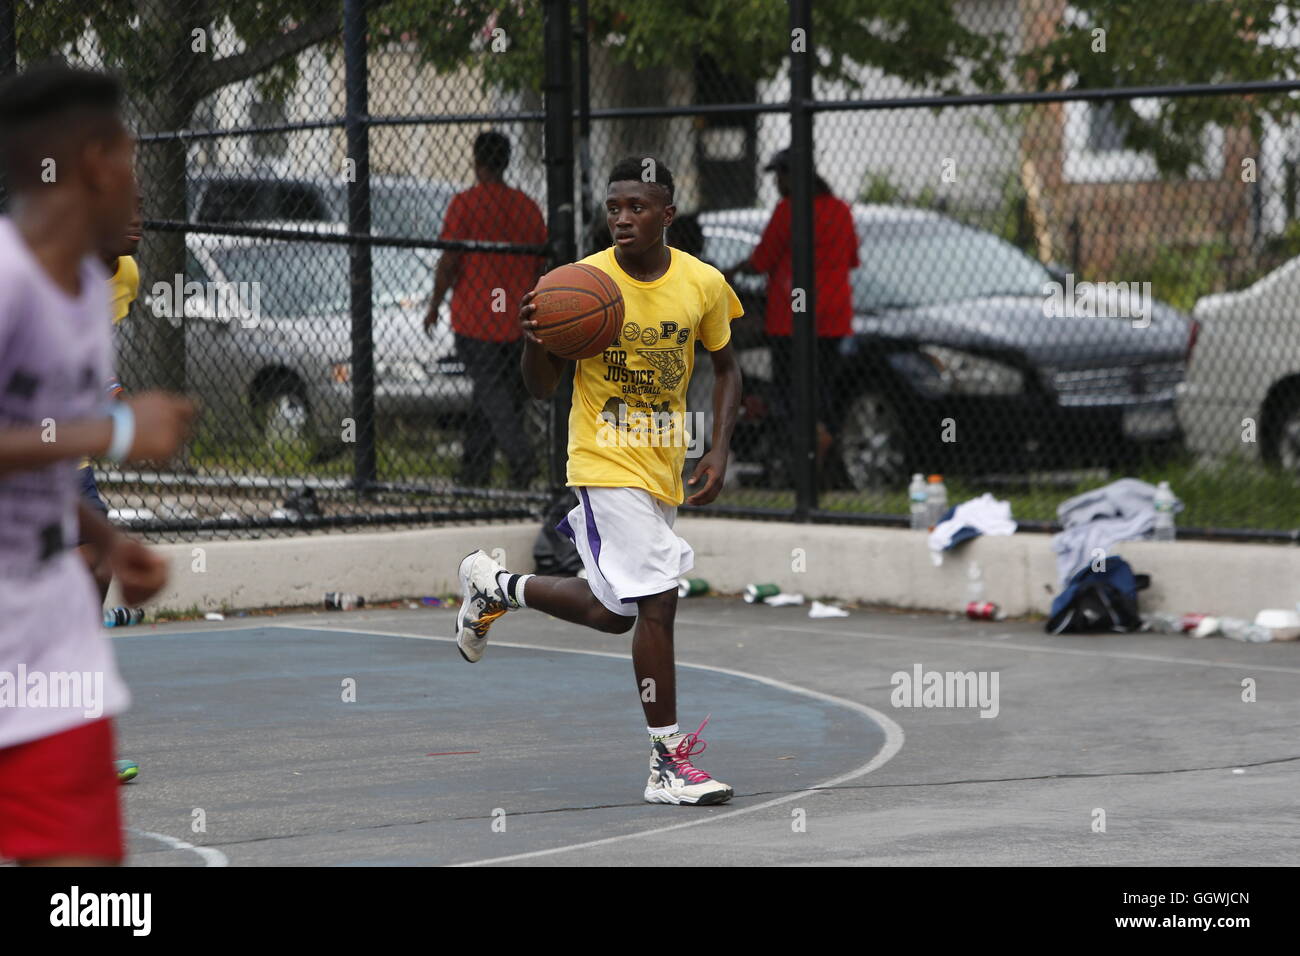 New York City, United States. 06th Aug, 2016. E4F, Equality for Flatbush staged its annual Hoops For Justice, an annual basketball tournament held in East Flatbush to honor the memories of Shantel Davis & Kimani Gray, two young people alleged to have been victims of lethal force by the NYPD. © Andy Katz/Pacific Press/Alamy Live News Stock Photo